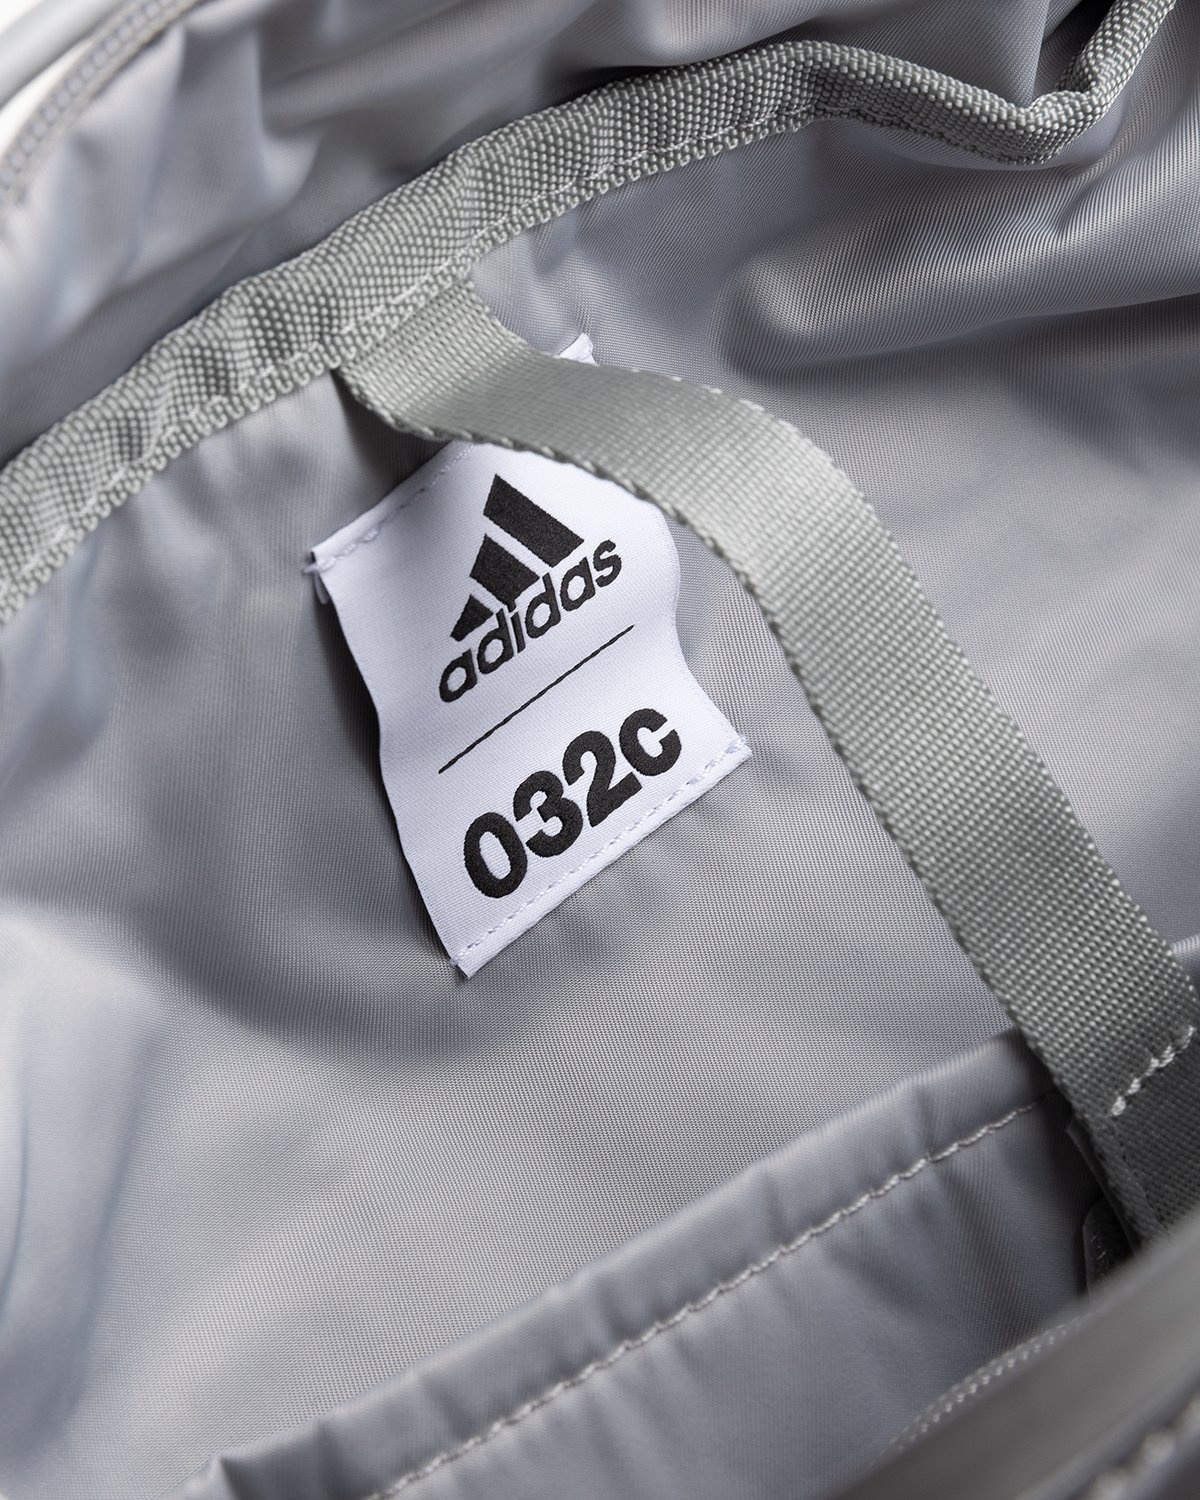 Adidas x 032c – Tote Greone - Tote Bags - White - Image 3